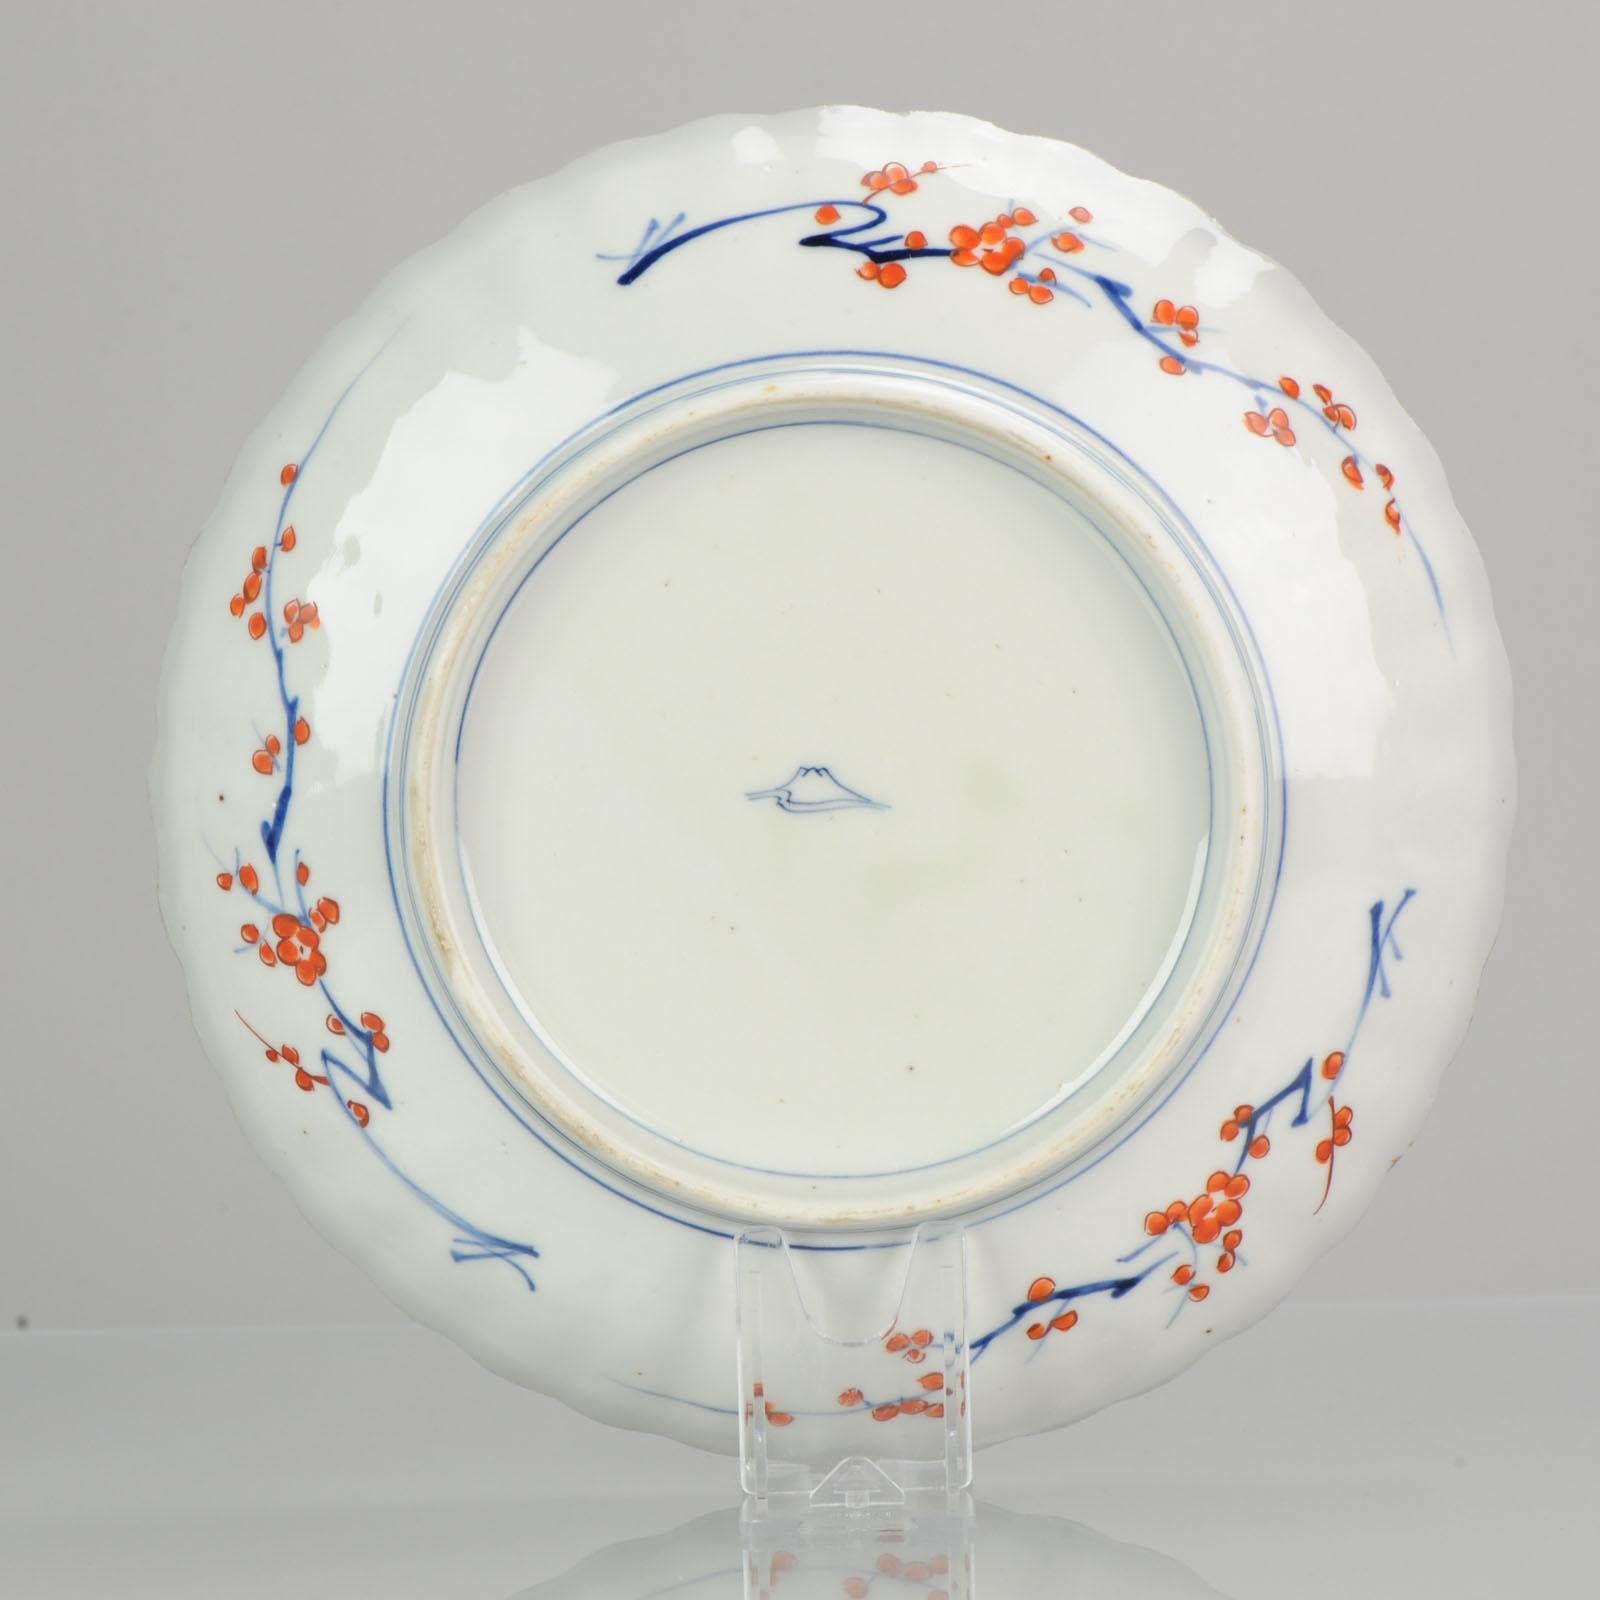 A very nicely and rare decorated Japanese porcelain plate, lovely scene. Central scene of a group of boats sailing and the border with a polychrome scene of flowers.

Probably first half of the 19th century

Base marked with an underglaze blue